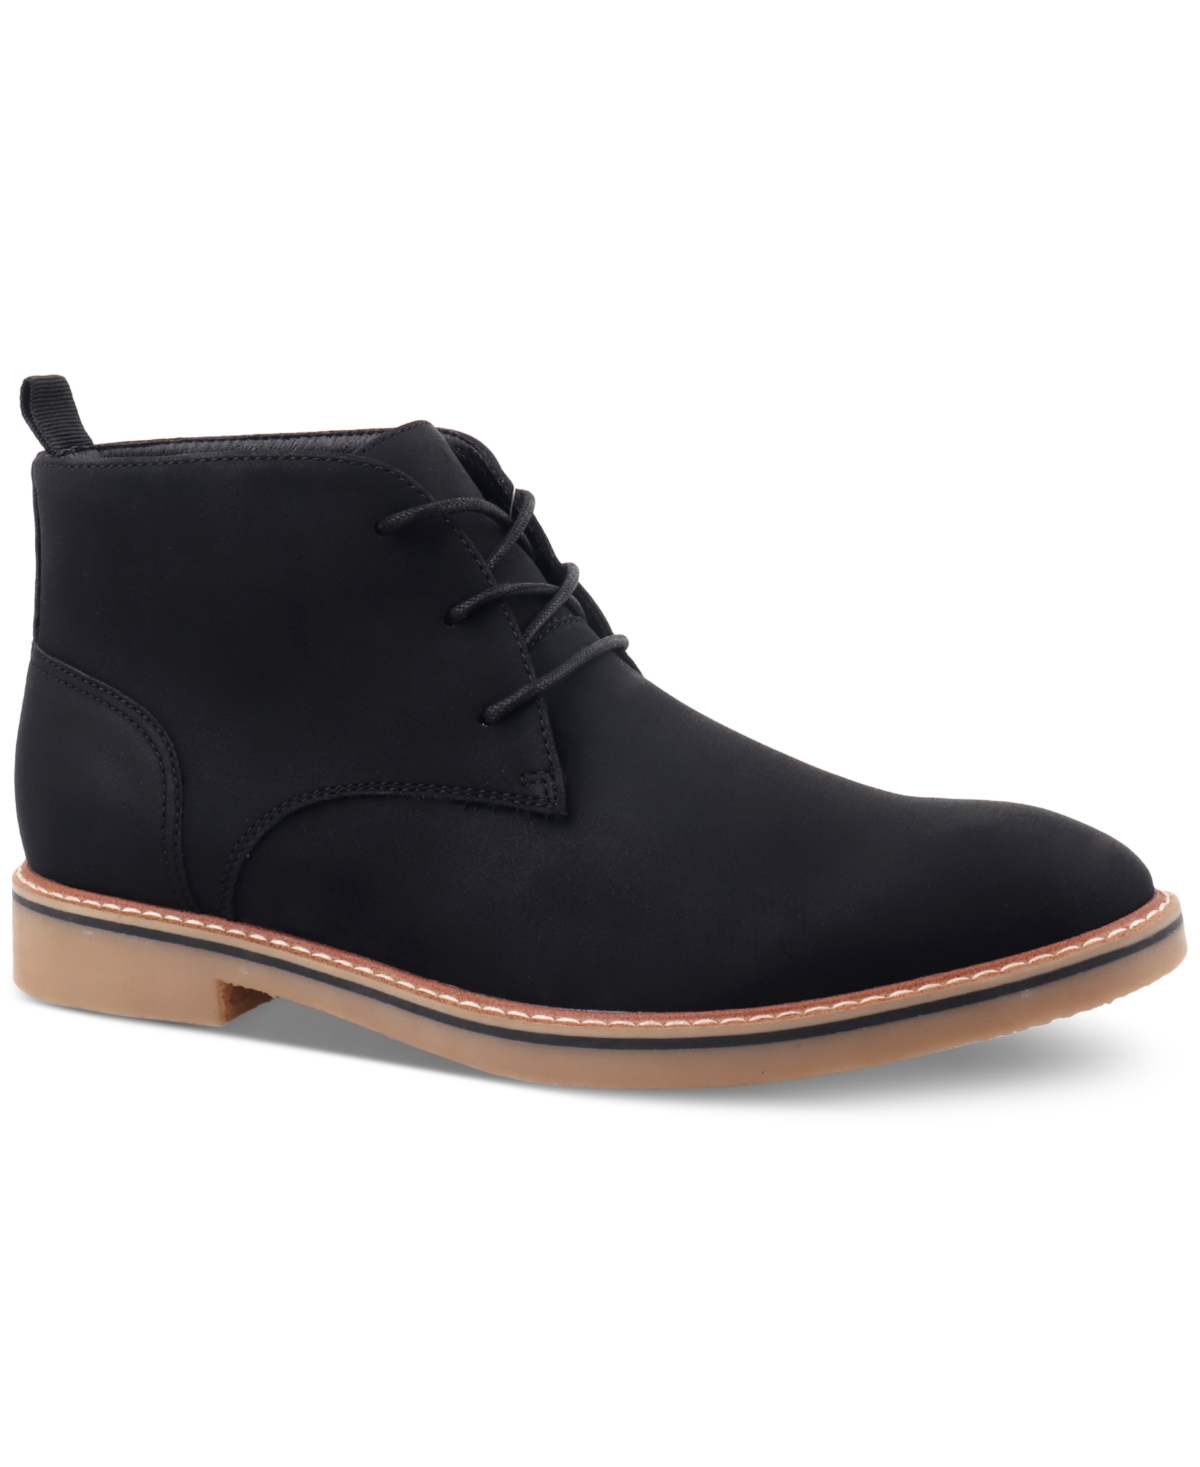 Club Room Men's Lace-Up Boots, Created for Macy's Men's Shoes | Smart ...